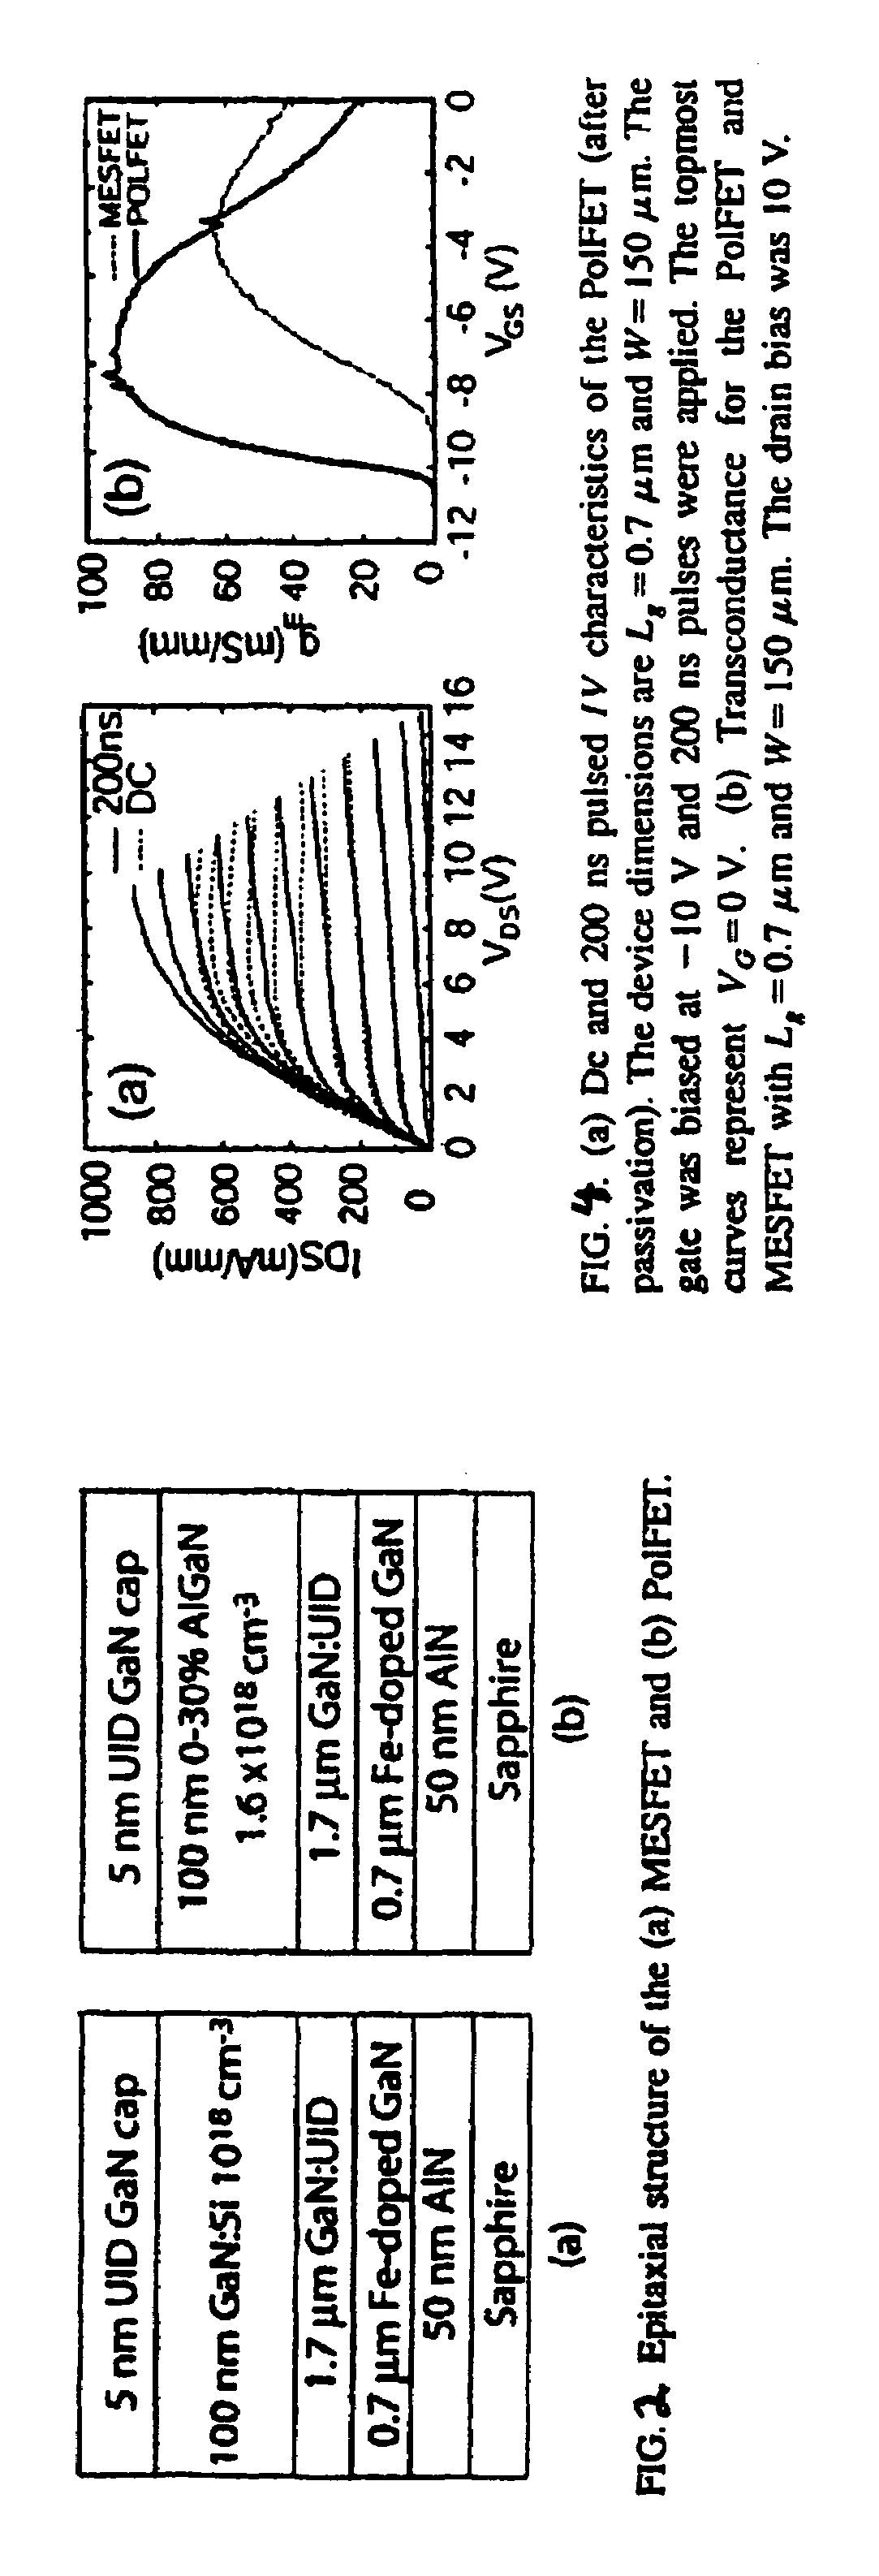 Polarization-doped field effect transistors (POLFETS) and materials and methods for making the same